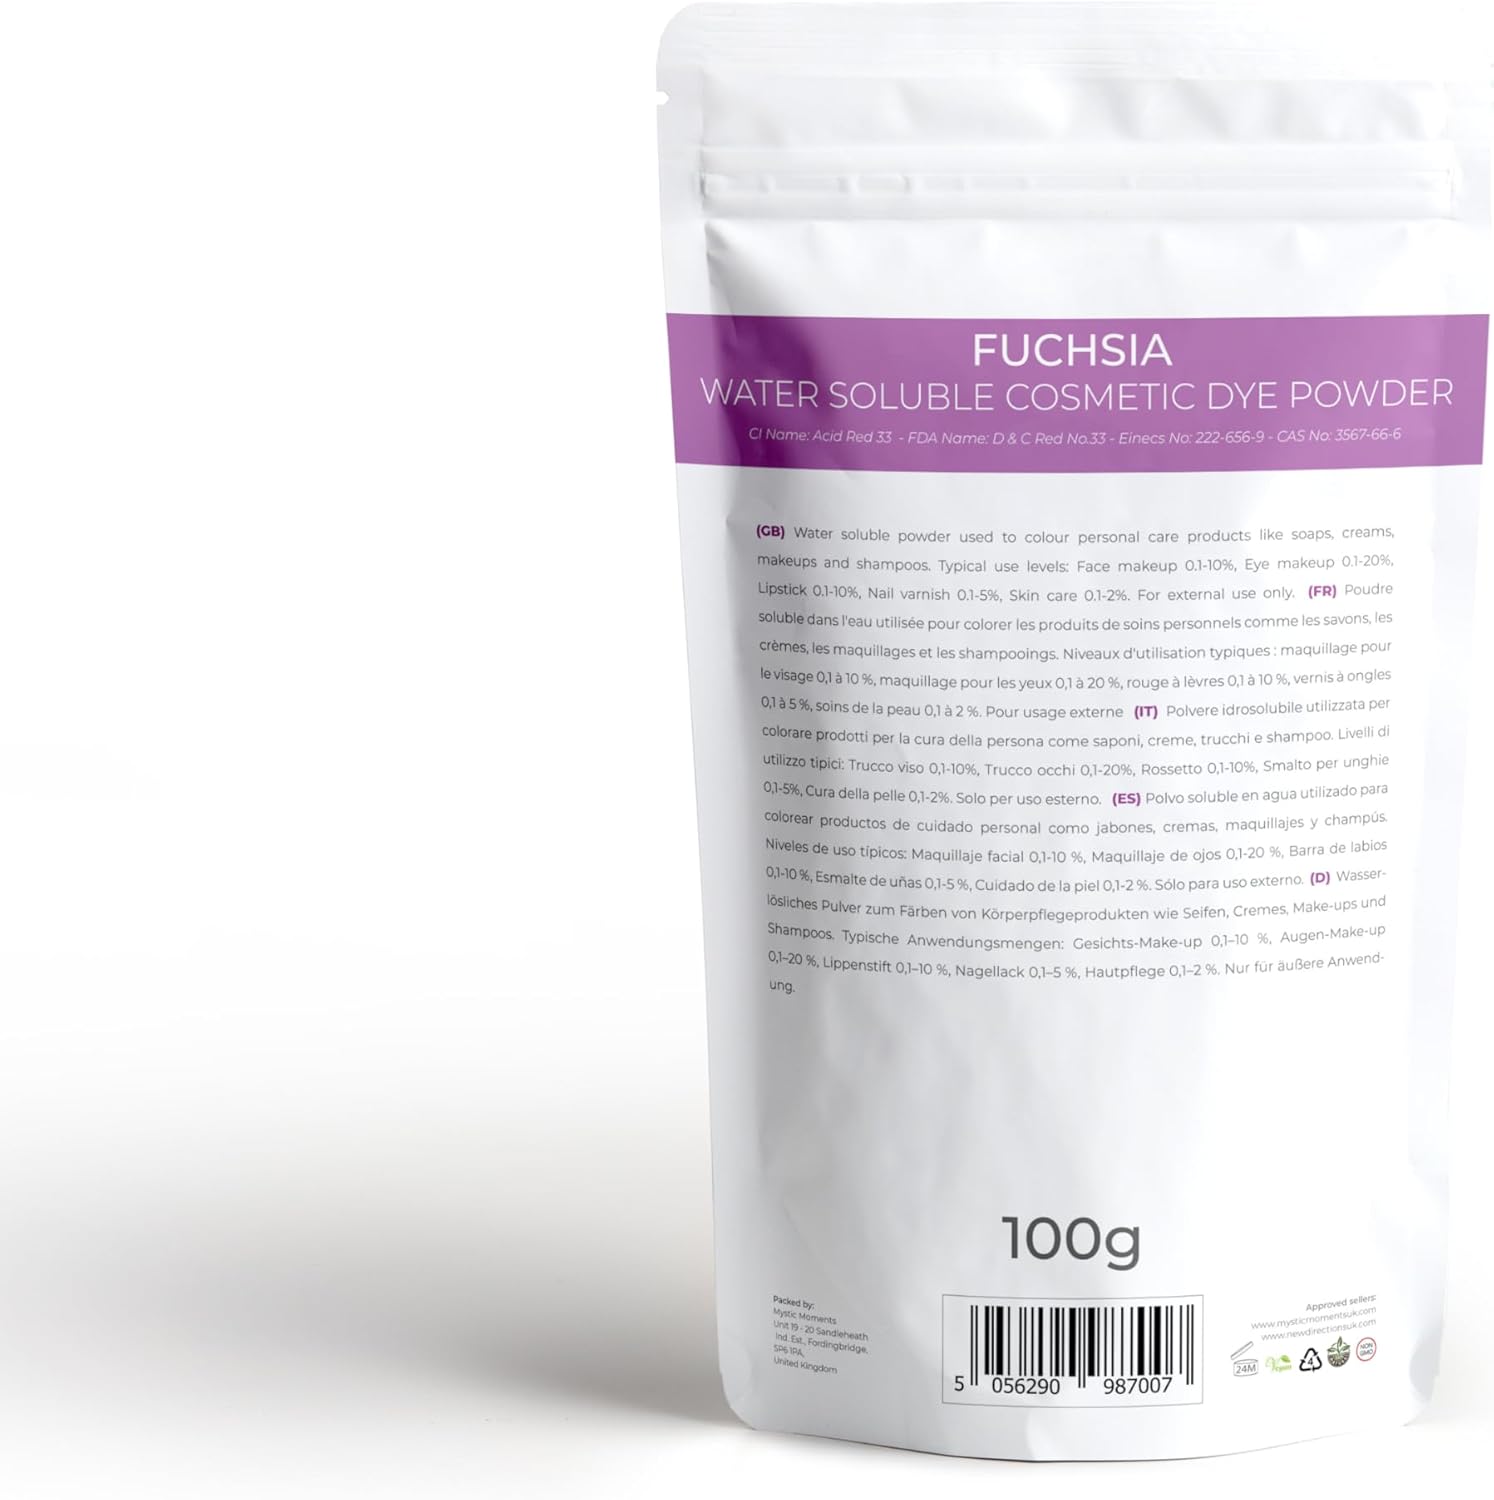 Mystic Moments | Fuchsia Water-Soluble Cosmetic Dye Powder 500g (5 x 100g Pouch) | Perfect for Soap Making, Creams, Make Ups, Shampoos and Lotions : Amazon.co.uk: Home & Kitchen